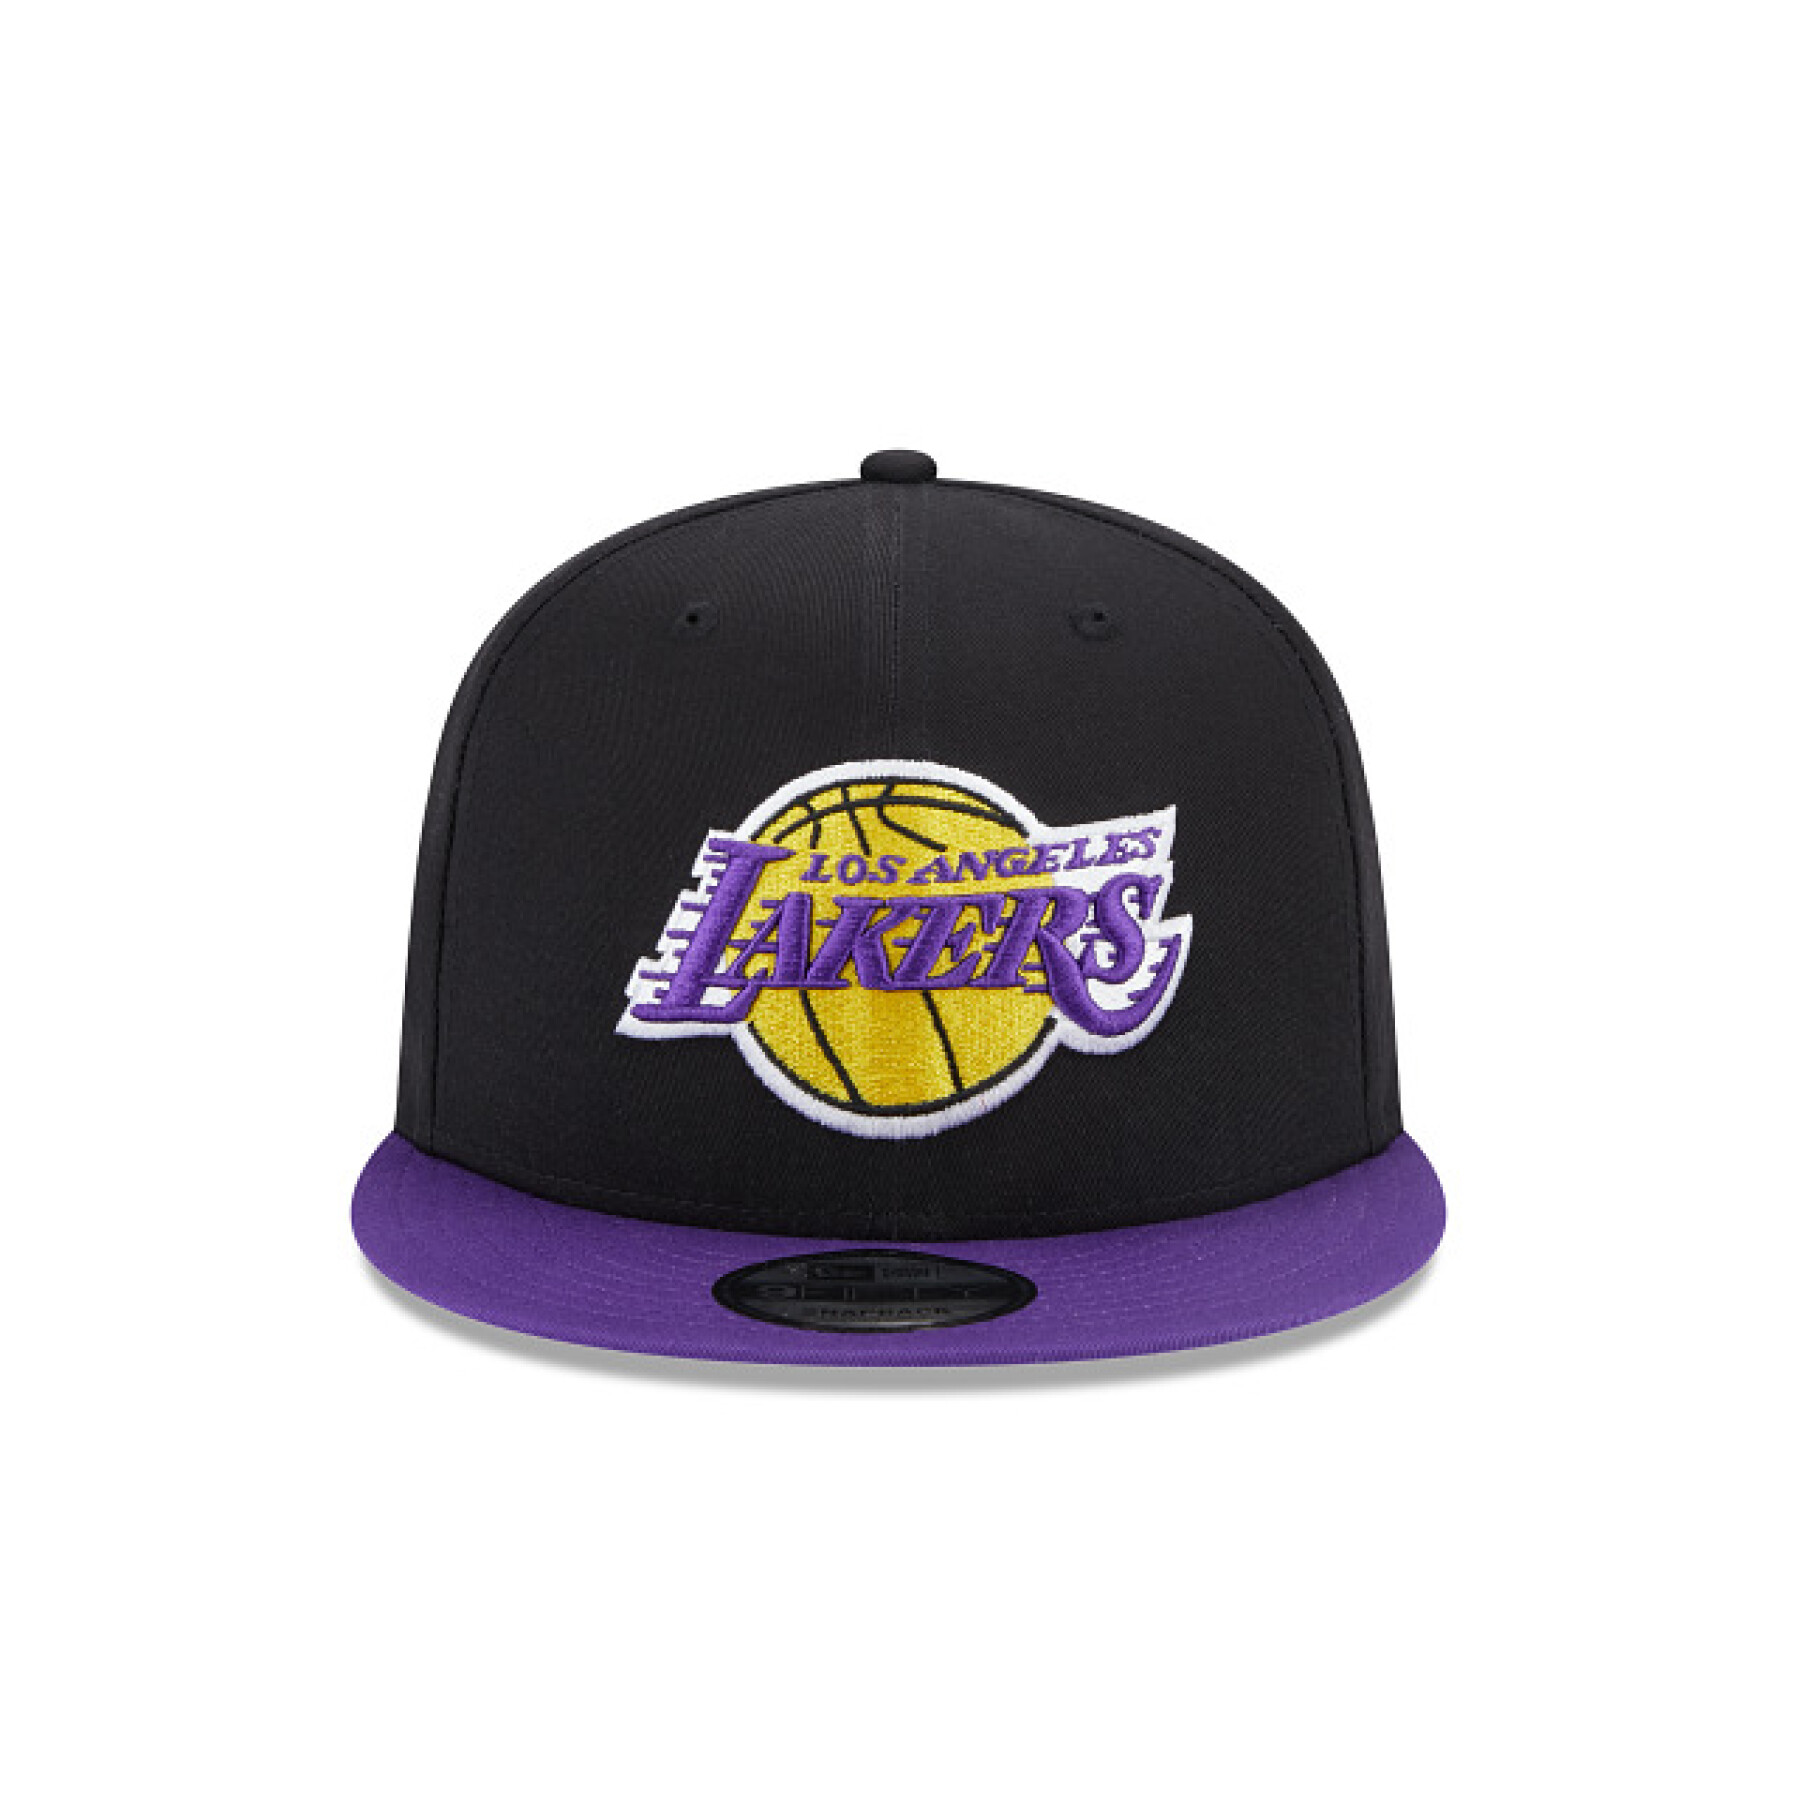 Cappello snapback Lakers 9fifty